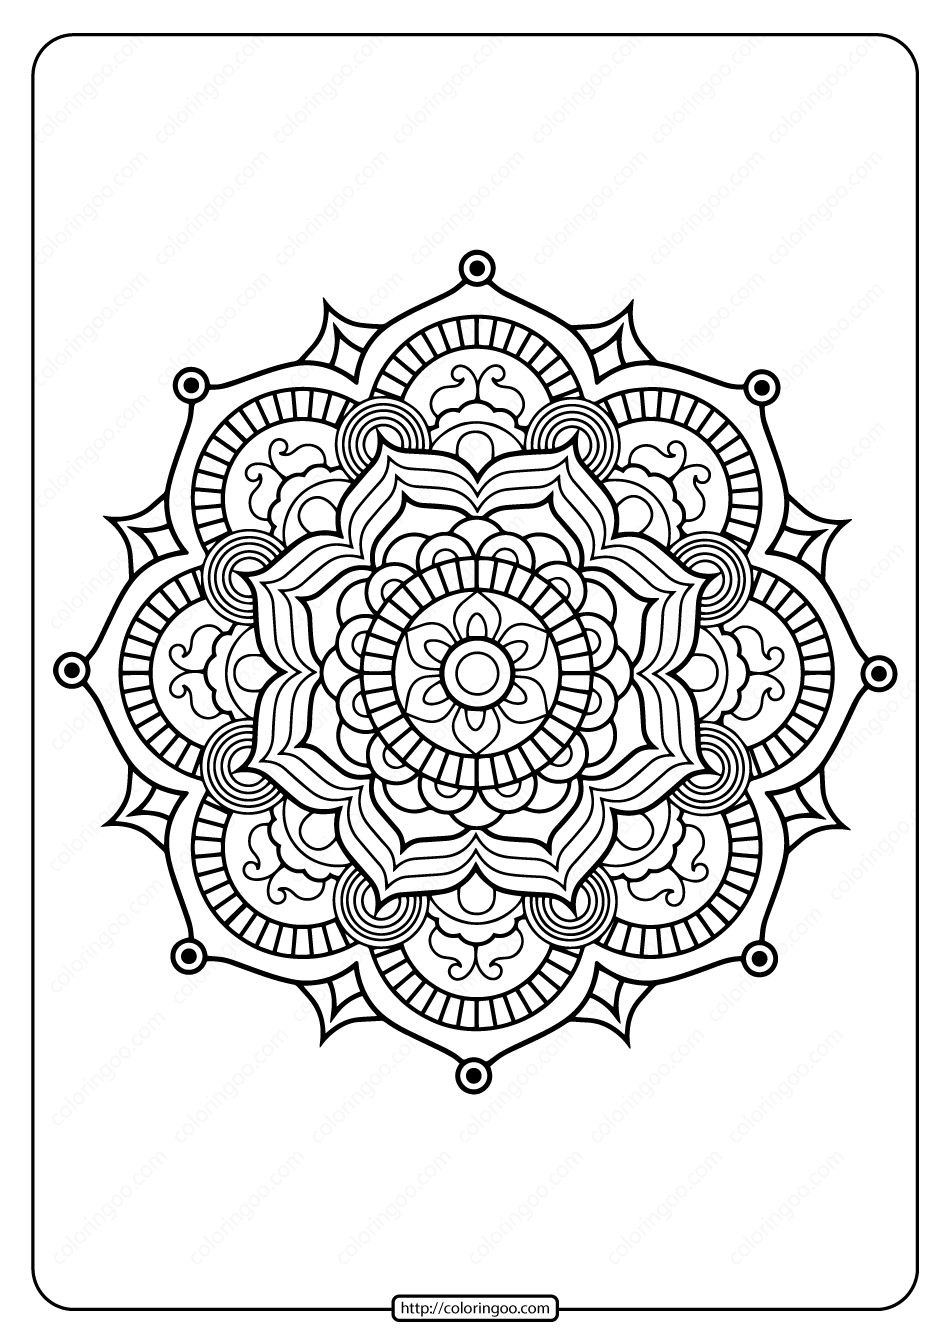 Printable PDF Coloring Book Pages for Adults 014